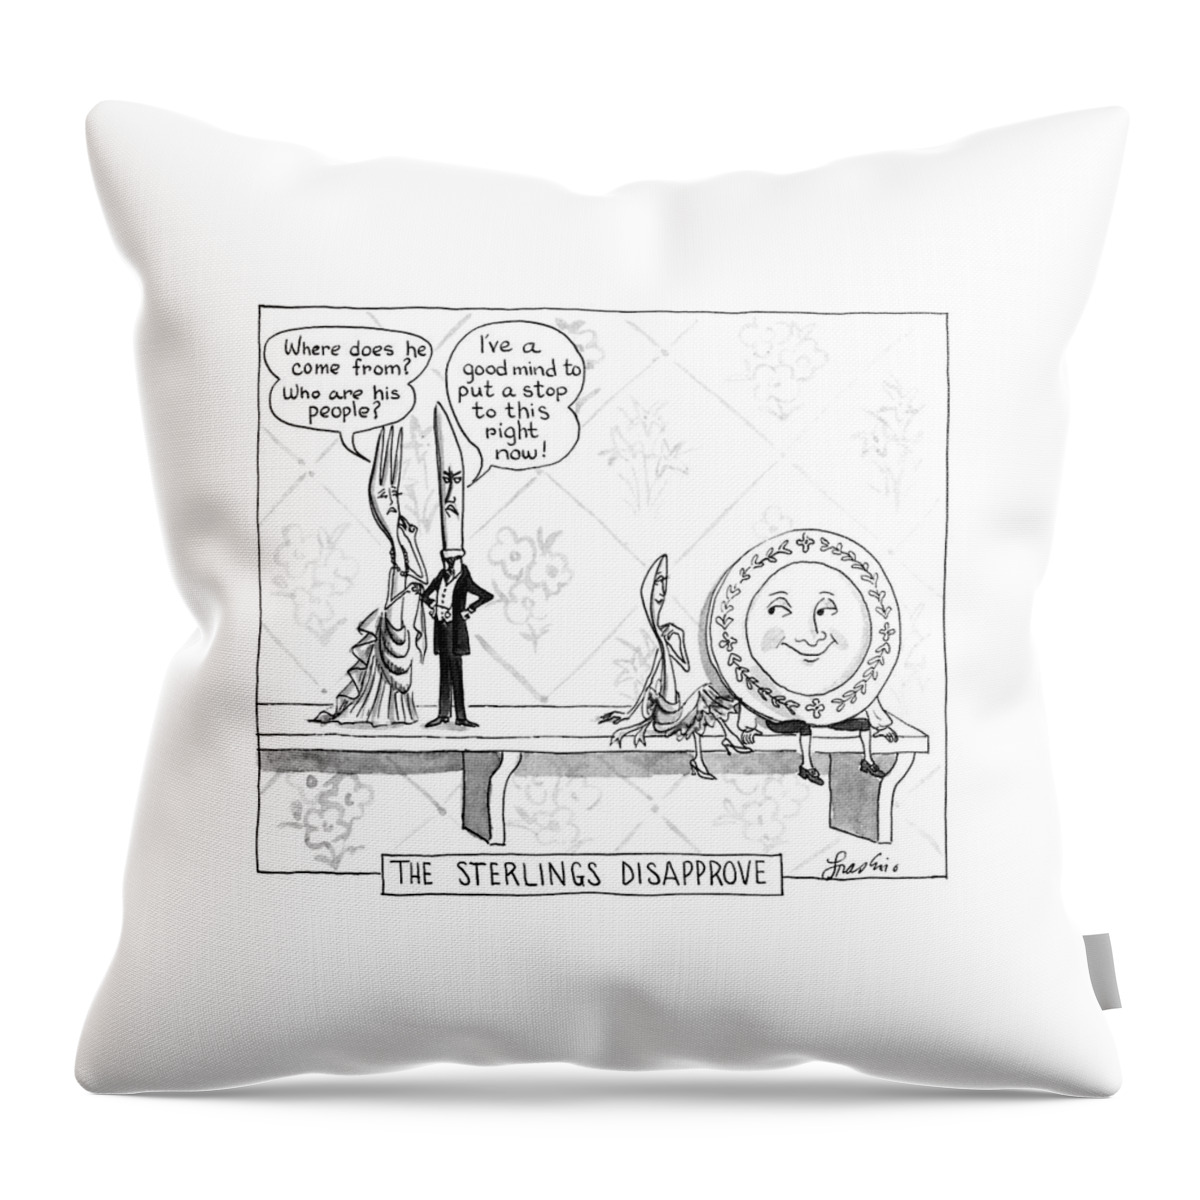 The Sterlings Disapprove: Throw Pillow